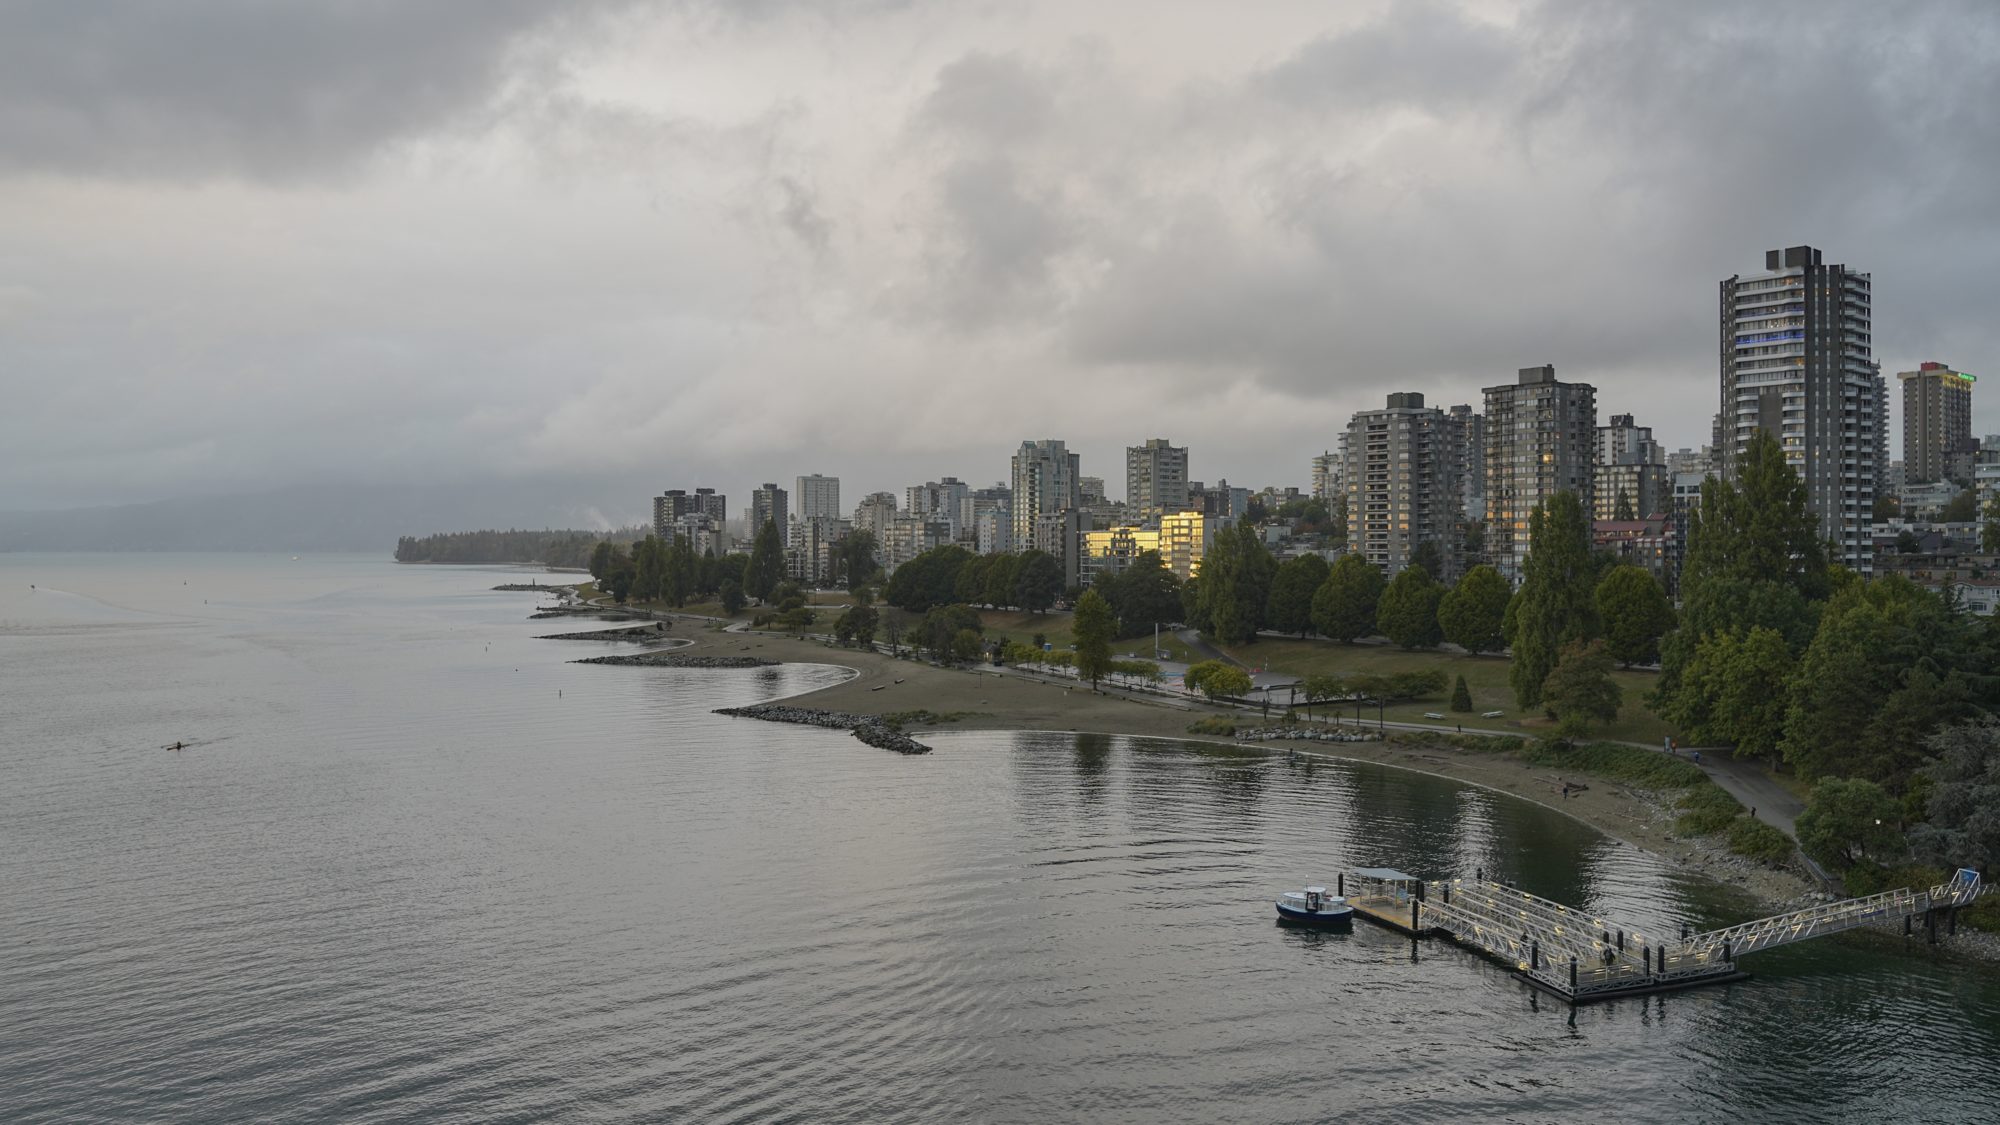 Sunset Beach and West End towers. The sky is grey, and one single building is reflecting gold light from the sunset